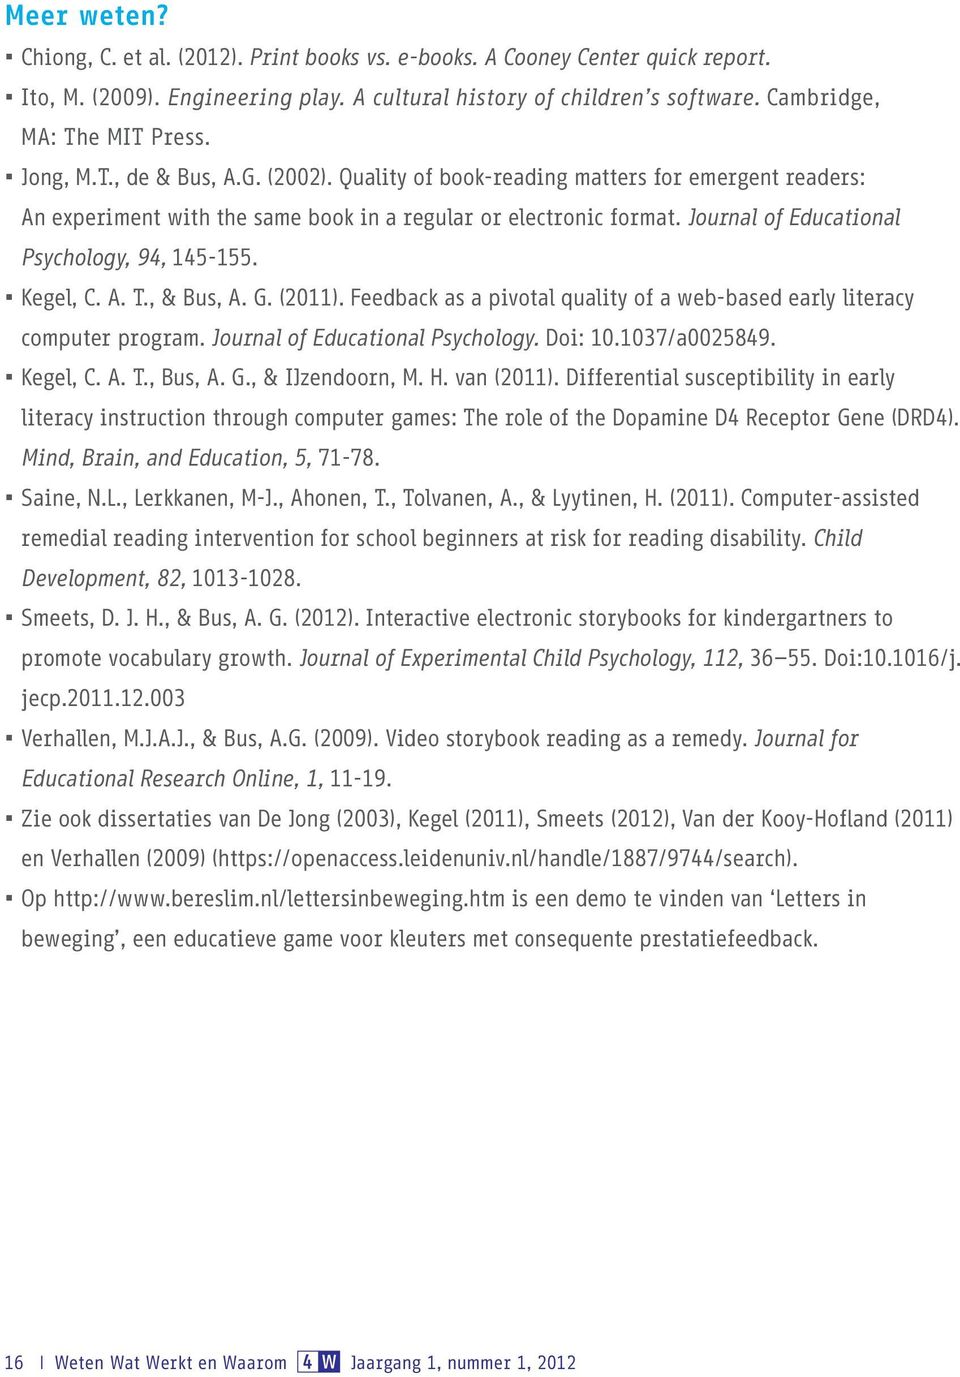 Journal of Educational Psychology, 94, 145-155. Kegel, C. A. T., & Bus, A. G. (2011). Feedback as a pivotal quality of a web-based early literacy computer program. Journal of Educational Psychology.